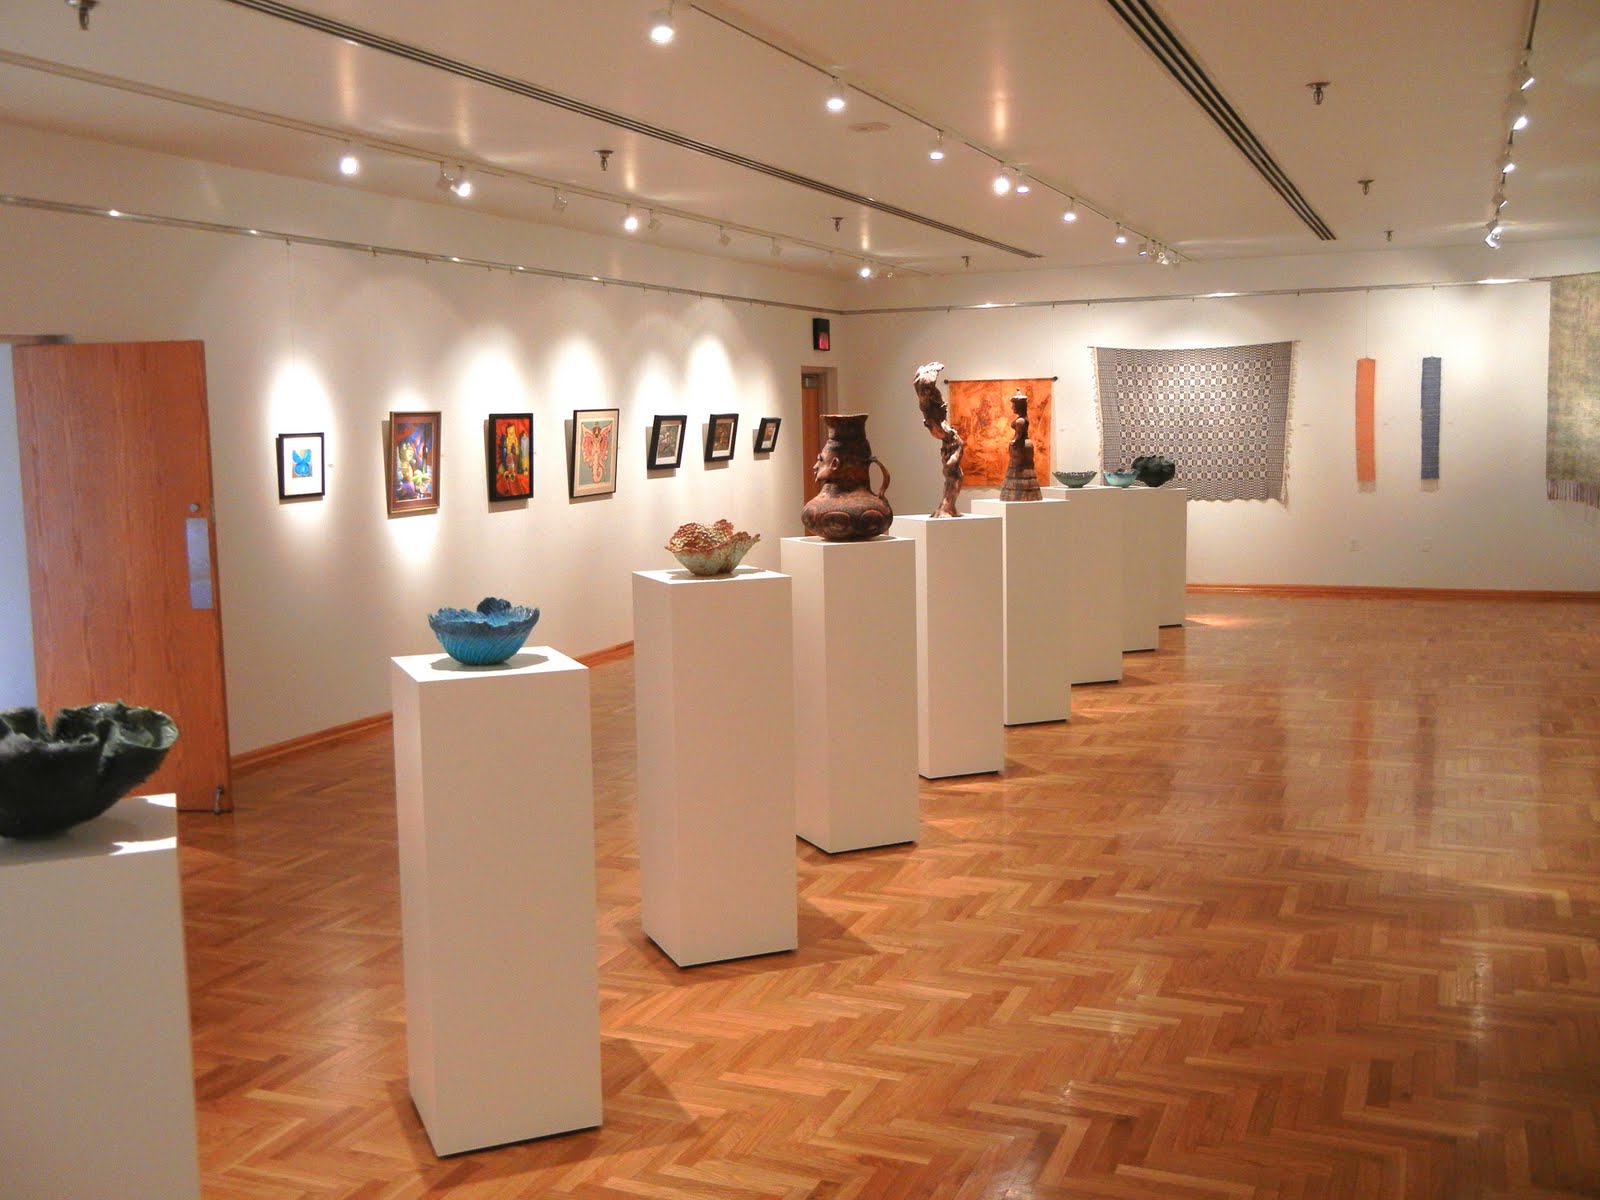 Photo of the interior of the AB Cohen Center art gallery. Paintings hang on the wall and ceramic art rests on pedestals.